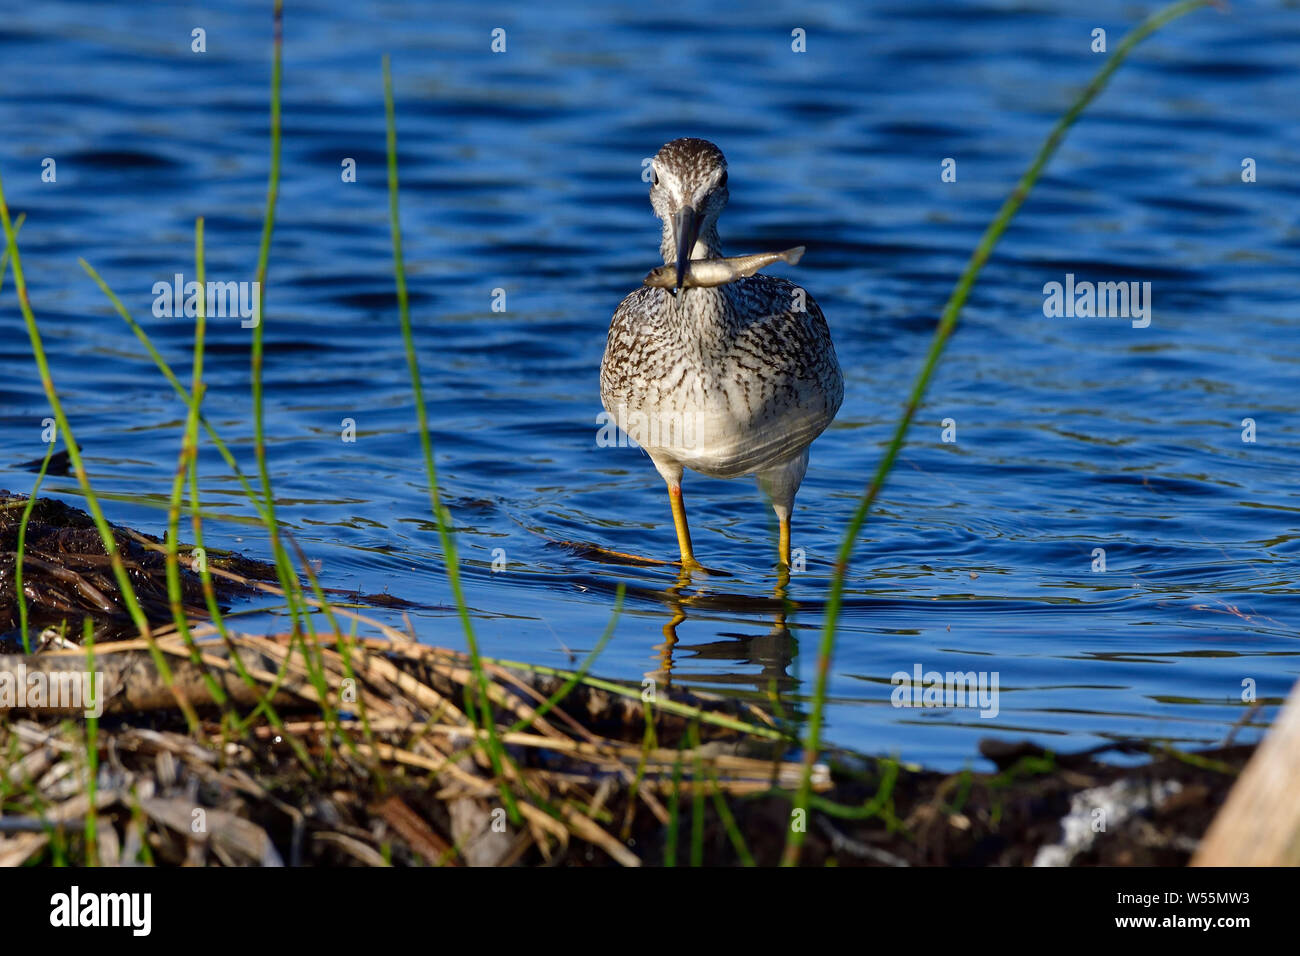 A Greater yellowlegs shorebird ' Tringa melanoleuca', walking to shore with his catch of a small fish Stock Photo